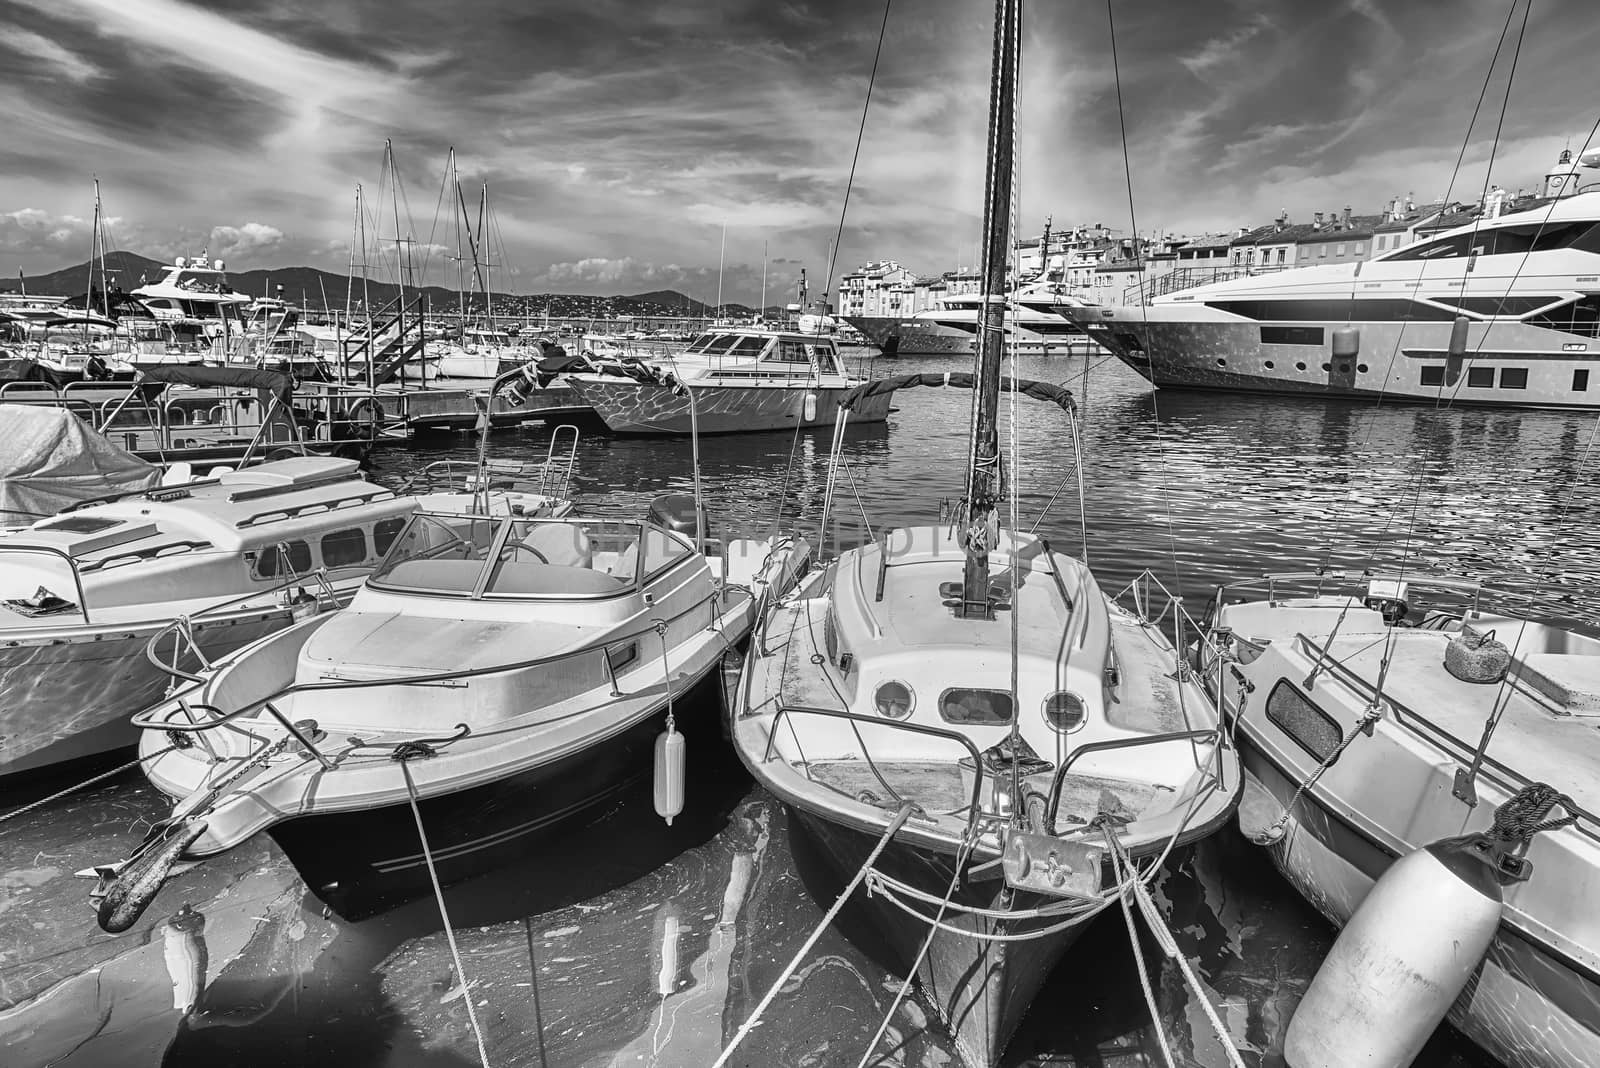 View of the old harbor of Saint-Tropez, Cote d'Azur, France by marcorubino